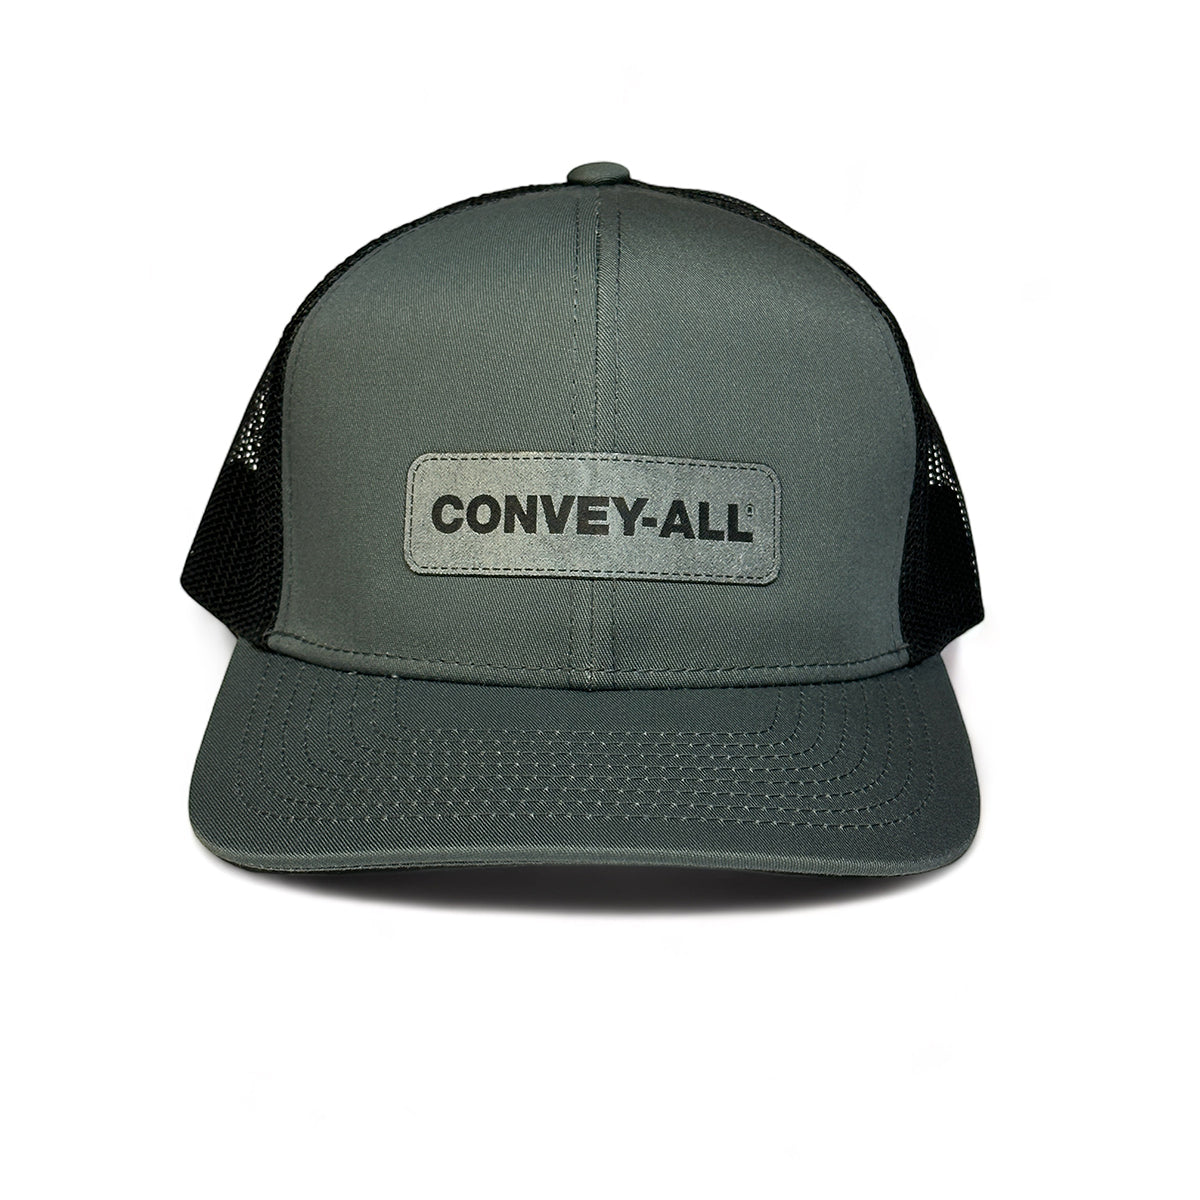 Convey-All Trucker Hat with Laser Etched Suede Patch